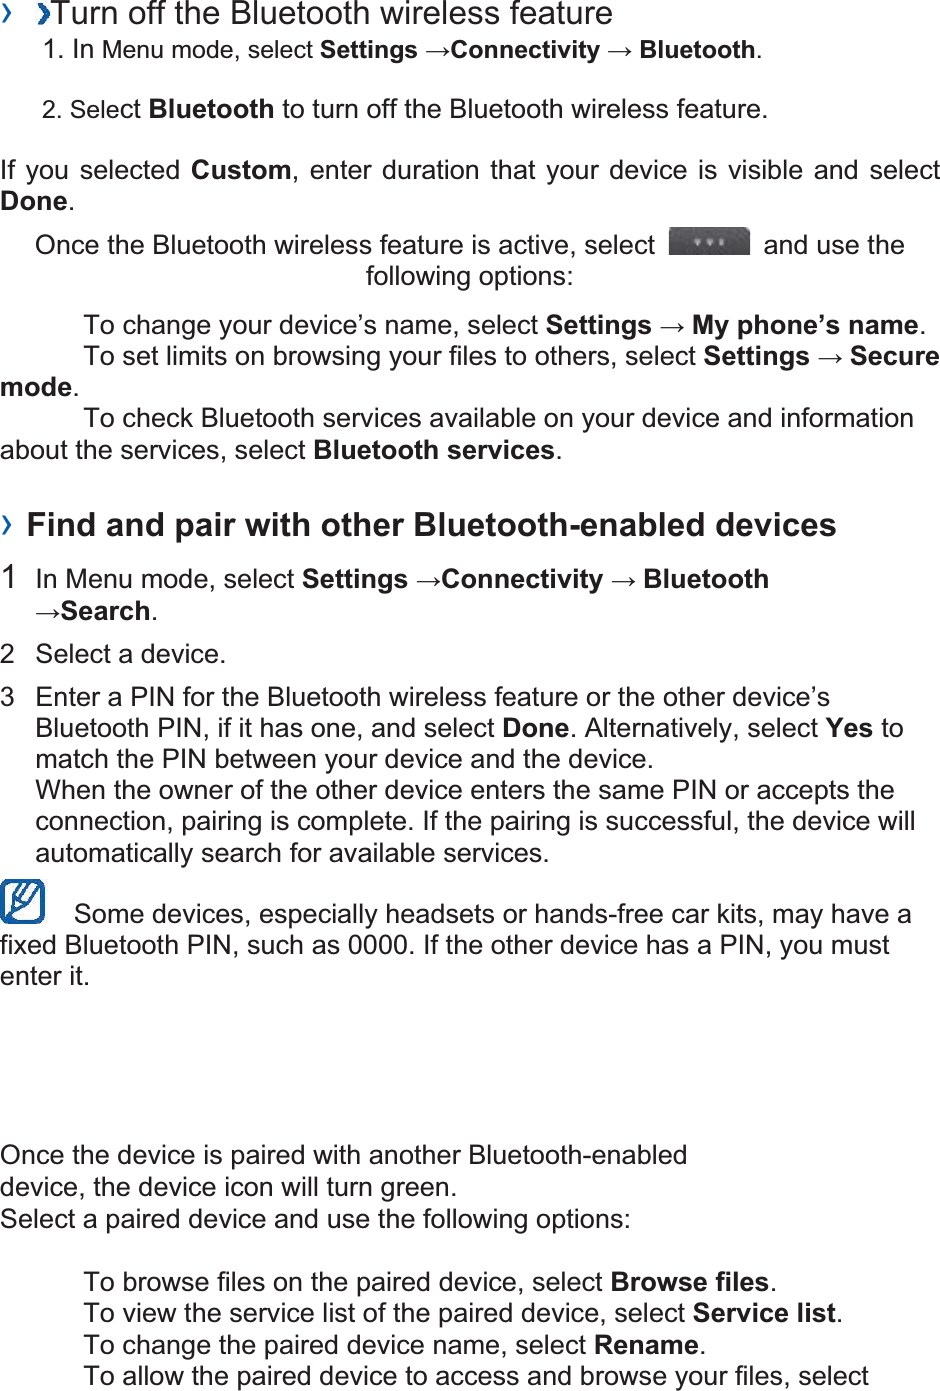 ›  Turn off the Bluetooth wireless feature   1. In Menu mode, select Settings Connectivity  Bluetooth. 2. Select Bluetooth to turn off the Bluetooth wireless feature. If you selected Custom, enter duration that your device is visible and select Done.  Once the Bluetooth wireless feature is active, select    and use the following options:     To change your device’s name, select Settings  My phone’s name.    To set limits on browsing your files to others, select Settings  Secure mode.    To check Bluetooth services available on your device and information about the services, select Bluetooth services.   › Find and pair with other Bluetooth-enabled devices   1  In Menu mode, select Settings Connectivity  BluetoothSearch.  2  Select a device.   3  Enter a PIN for the Bluetooth wireless feature or the other device’s Bluetooth PIN, if it has one, and select Done. Alternatively, select Yes to match the PIN between your device and the device.   When the owner of the other device enters the same PIN or accepts the connection, pairing is complete. If the pairing is successful, the device will automatically search for available services.     Some devices, especially headsets or hands-free car kits, may have a fixed Bluetooth PIN, such as 0000. If the other device has a PIN, you must enter it.   Once the device is paired with another Bluetooth-enabled device, the device icon will turn green. Select a paired device and use the following options:    To browse files on the paired device, select Browse files.    To view the service list of the paired device, select Service list.    To change the paired device name, select Rename.   To allow the paired device to access and browse your files, select 